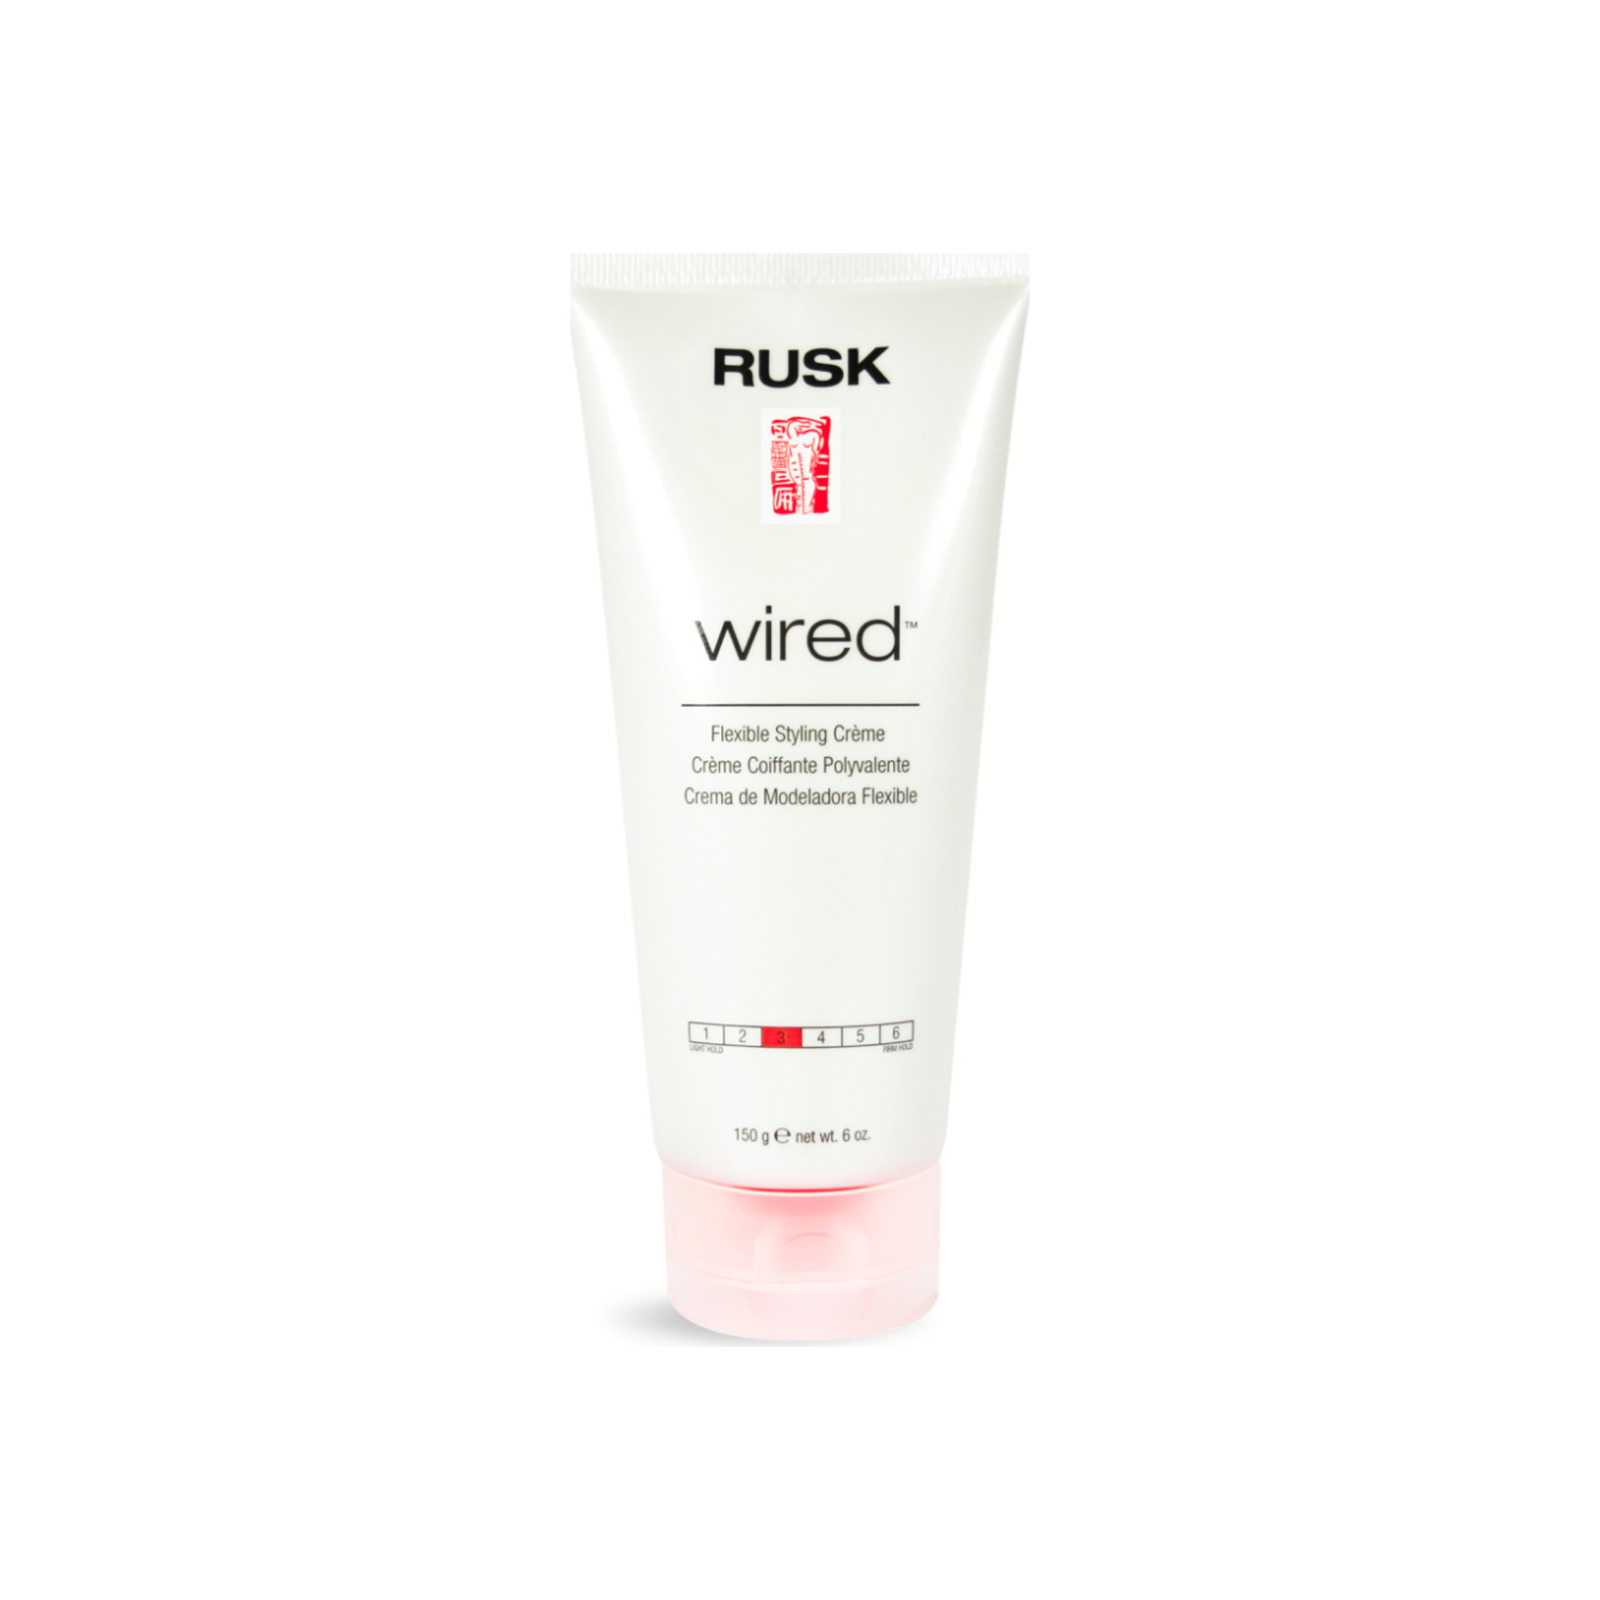 Rusk Wired Flexible Styling Cream, 6 oz (Pack of 6)